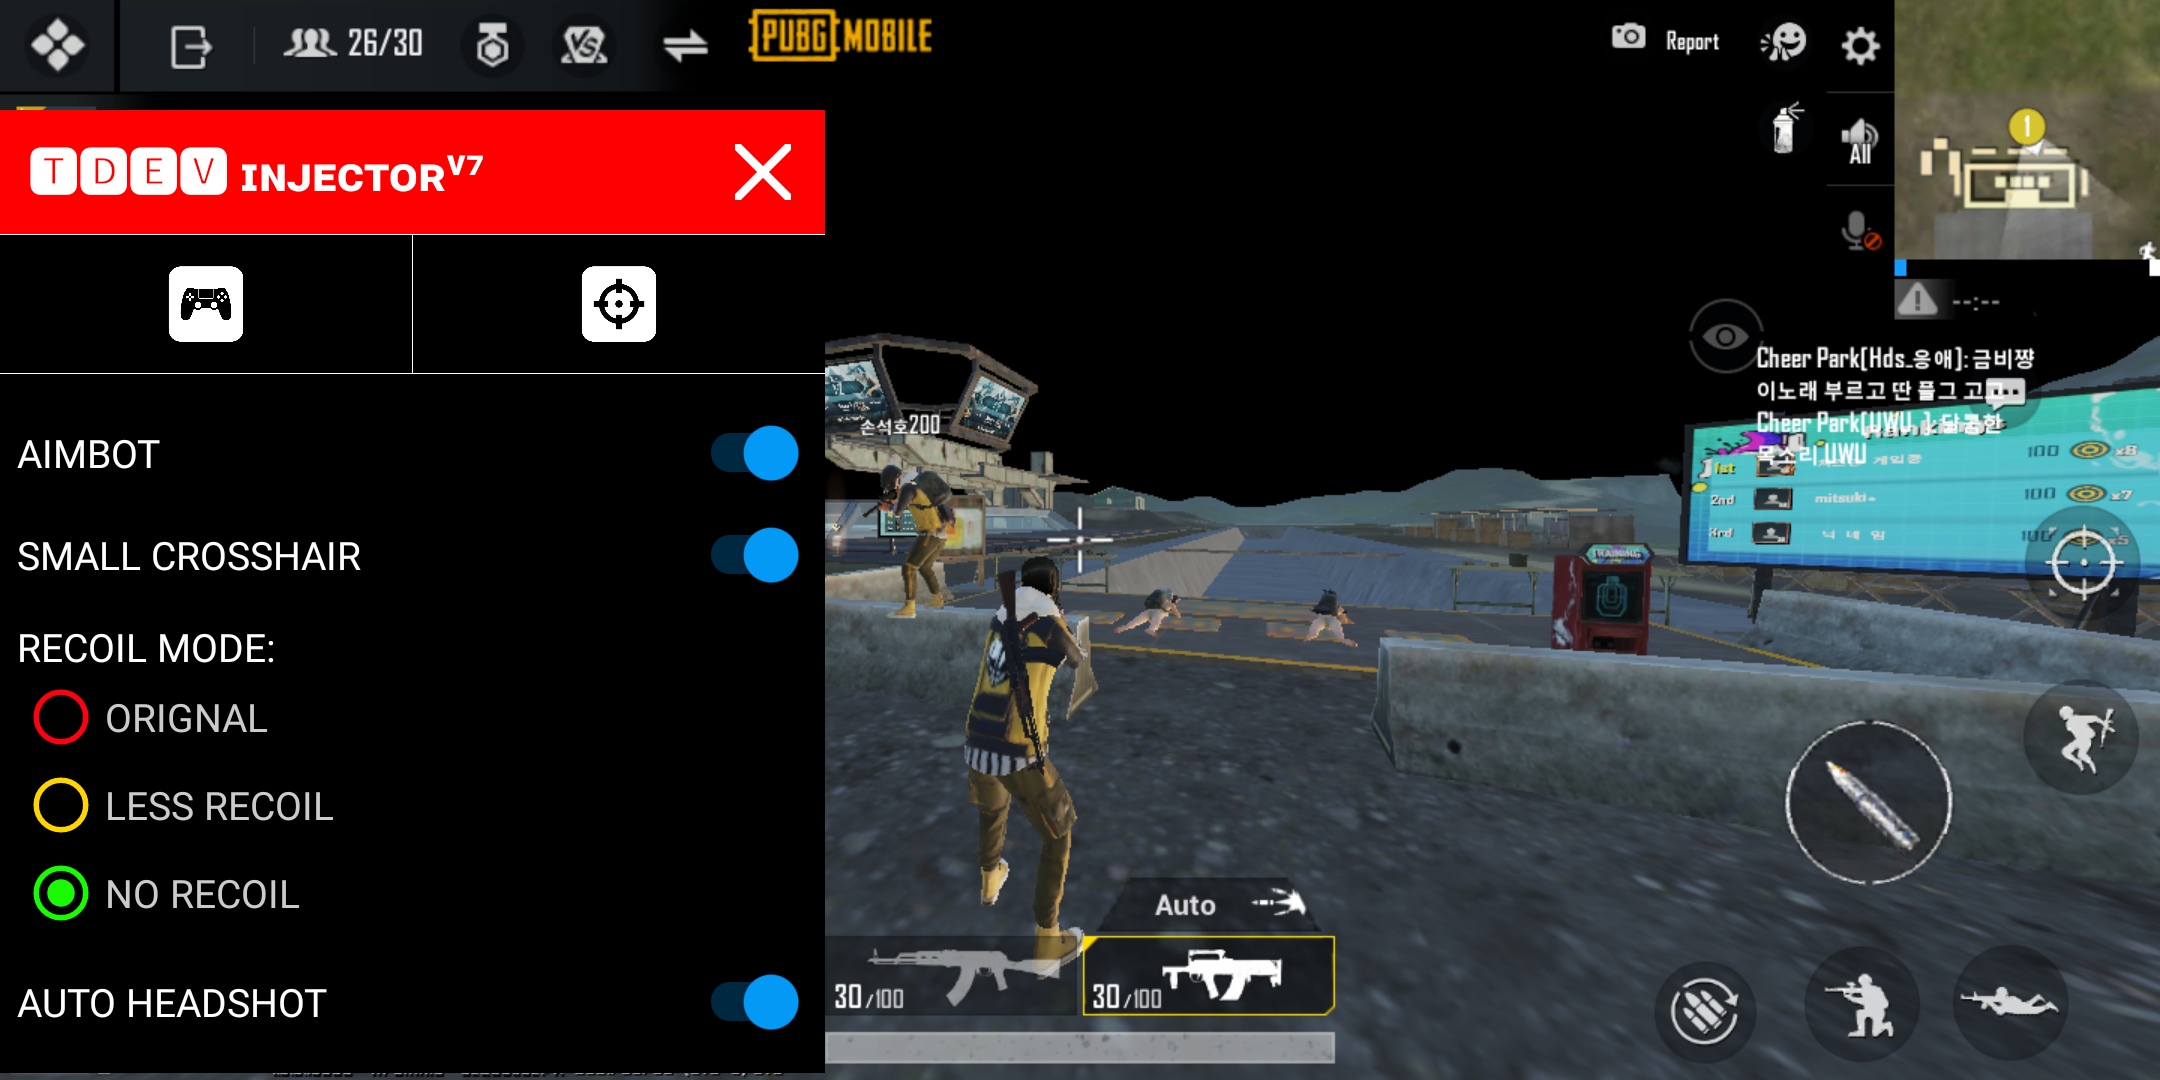 You are currently viewing PUBG Mobile C1S1 Injector v7 Hack 1.5.0 Season 20